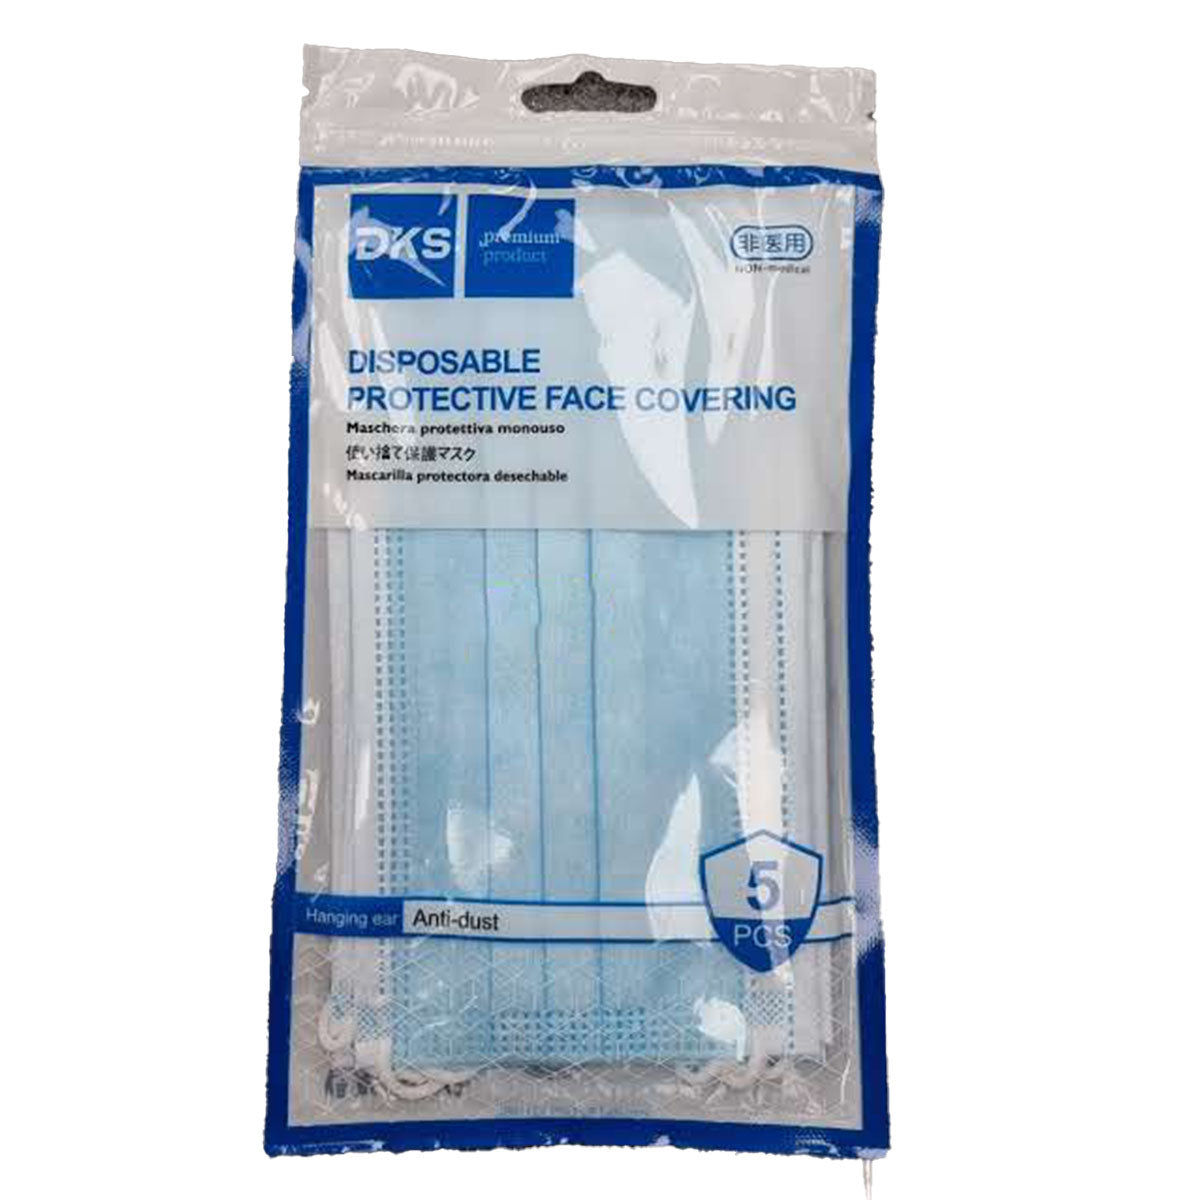 DKS - Disposable Masks - 5 Pack - Continental Food Store